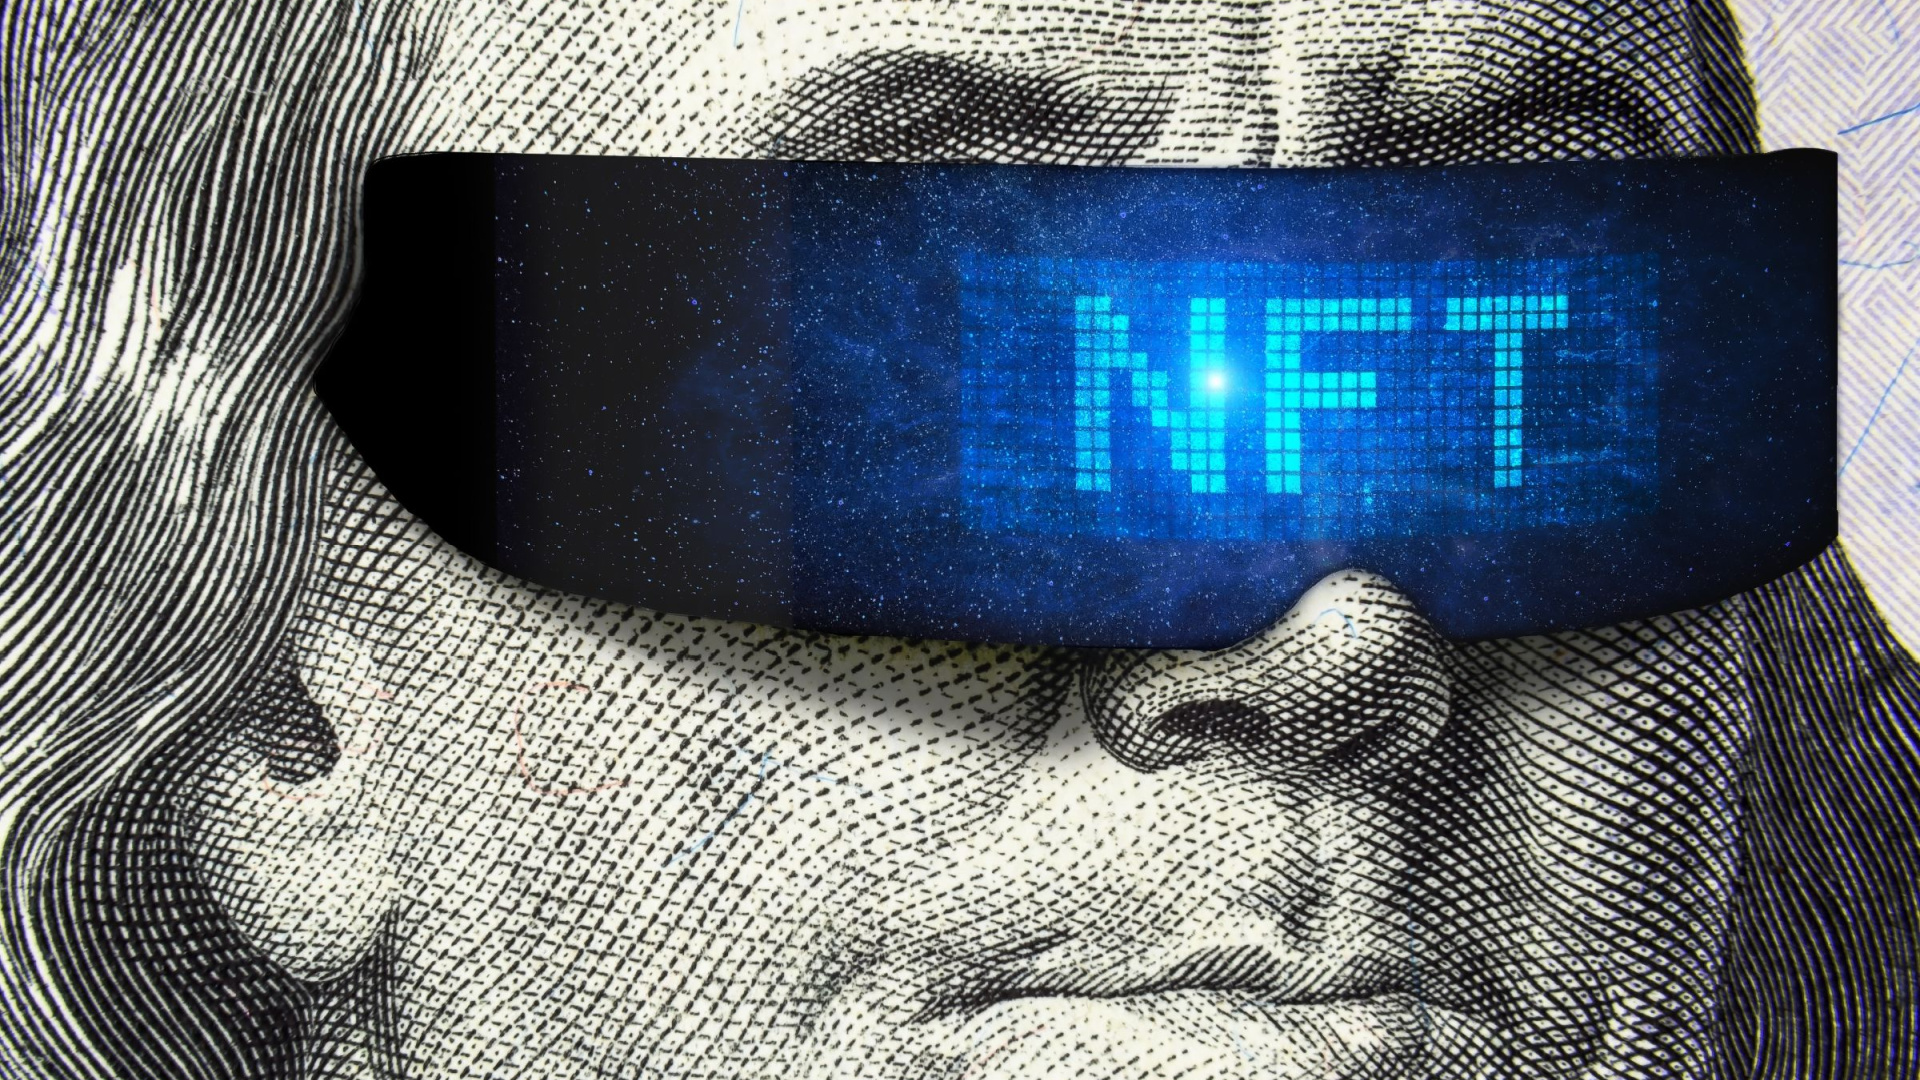 Ethereum – The 1st NFT created after The Merge cost 36.8 ETH in transaction fees